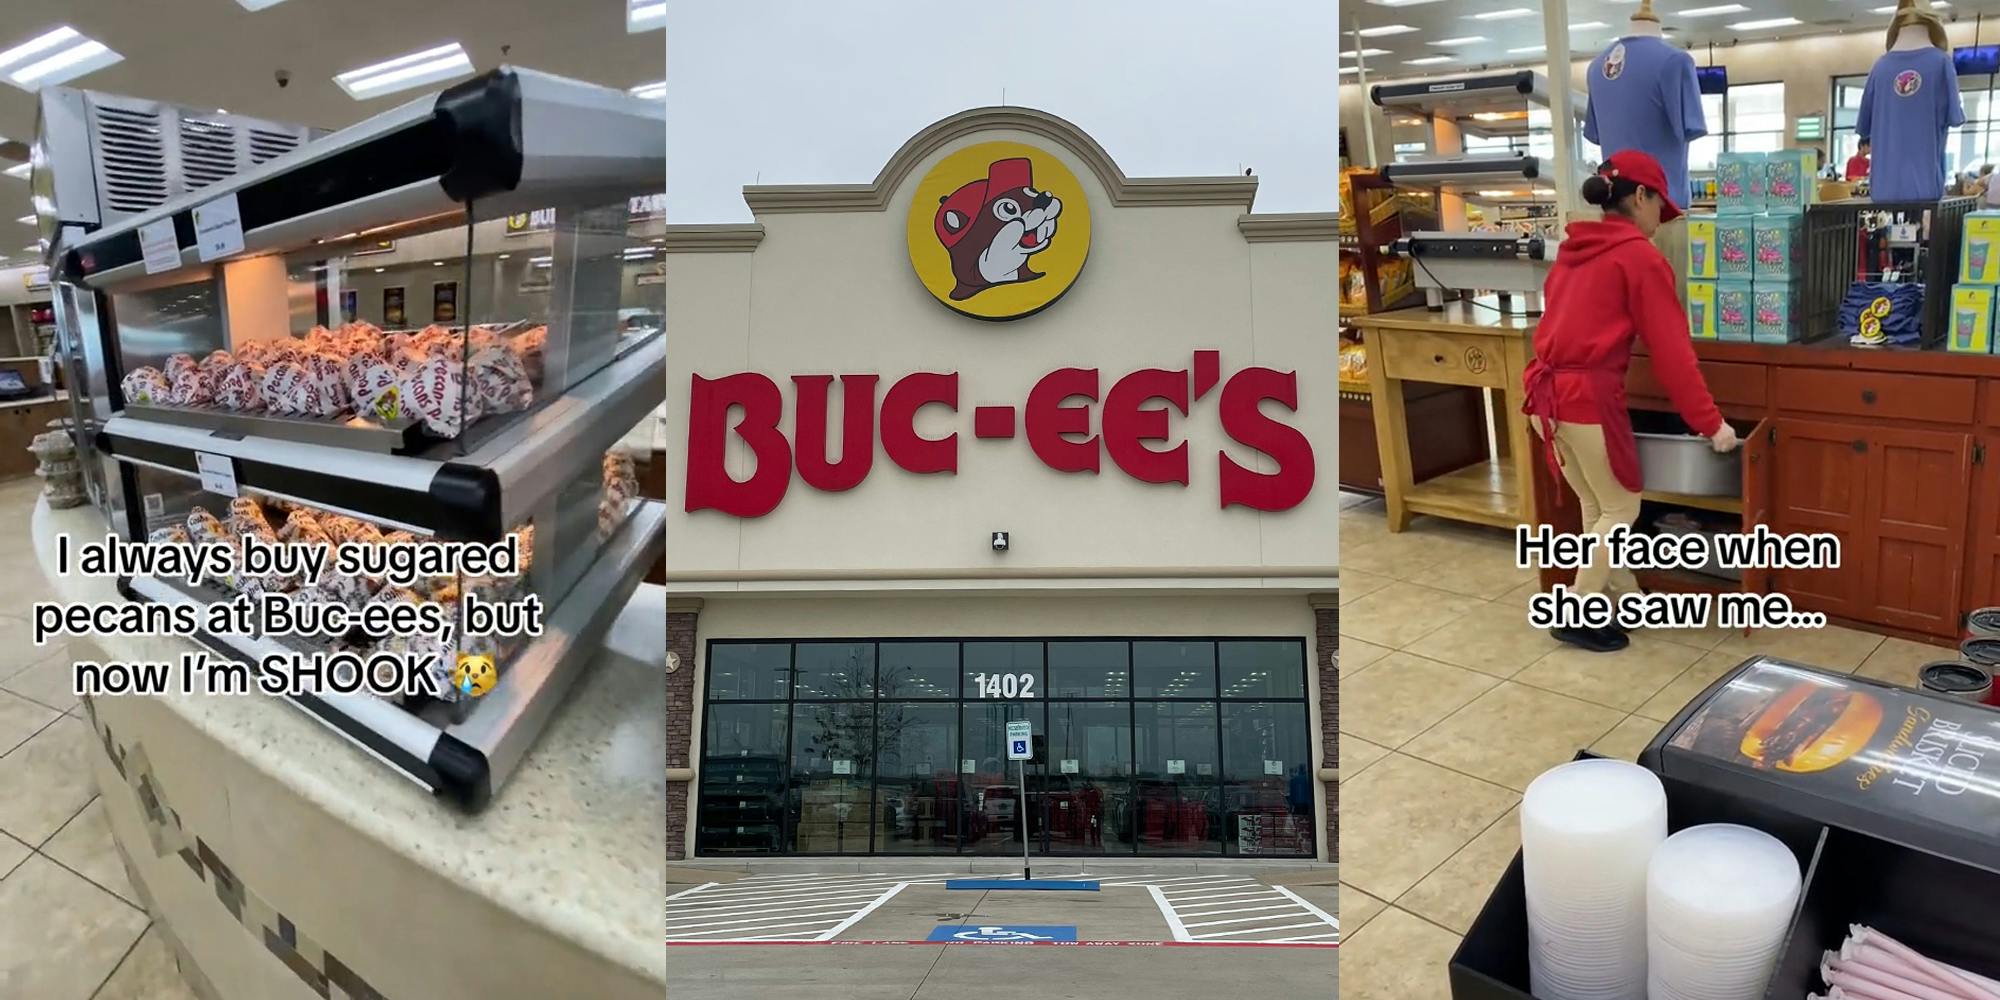 sugared pecans in heat case display at Buc-ee's with caption "I always buy sugared pecans at Buc-ee's, but now I'm SHOOK" (l) Buc-ee's building with sign (c) Buc-ee's employee putting tray of sugared pecans into cupboard with caption "Her face when she saw me..." (r)